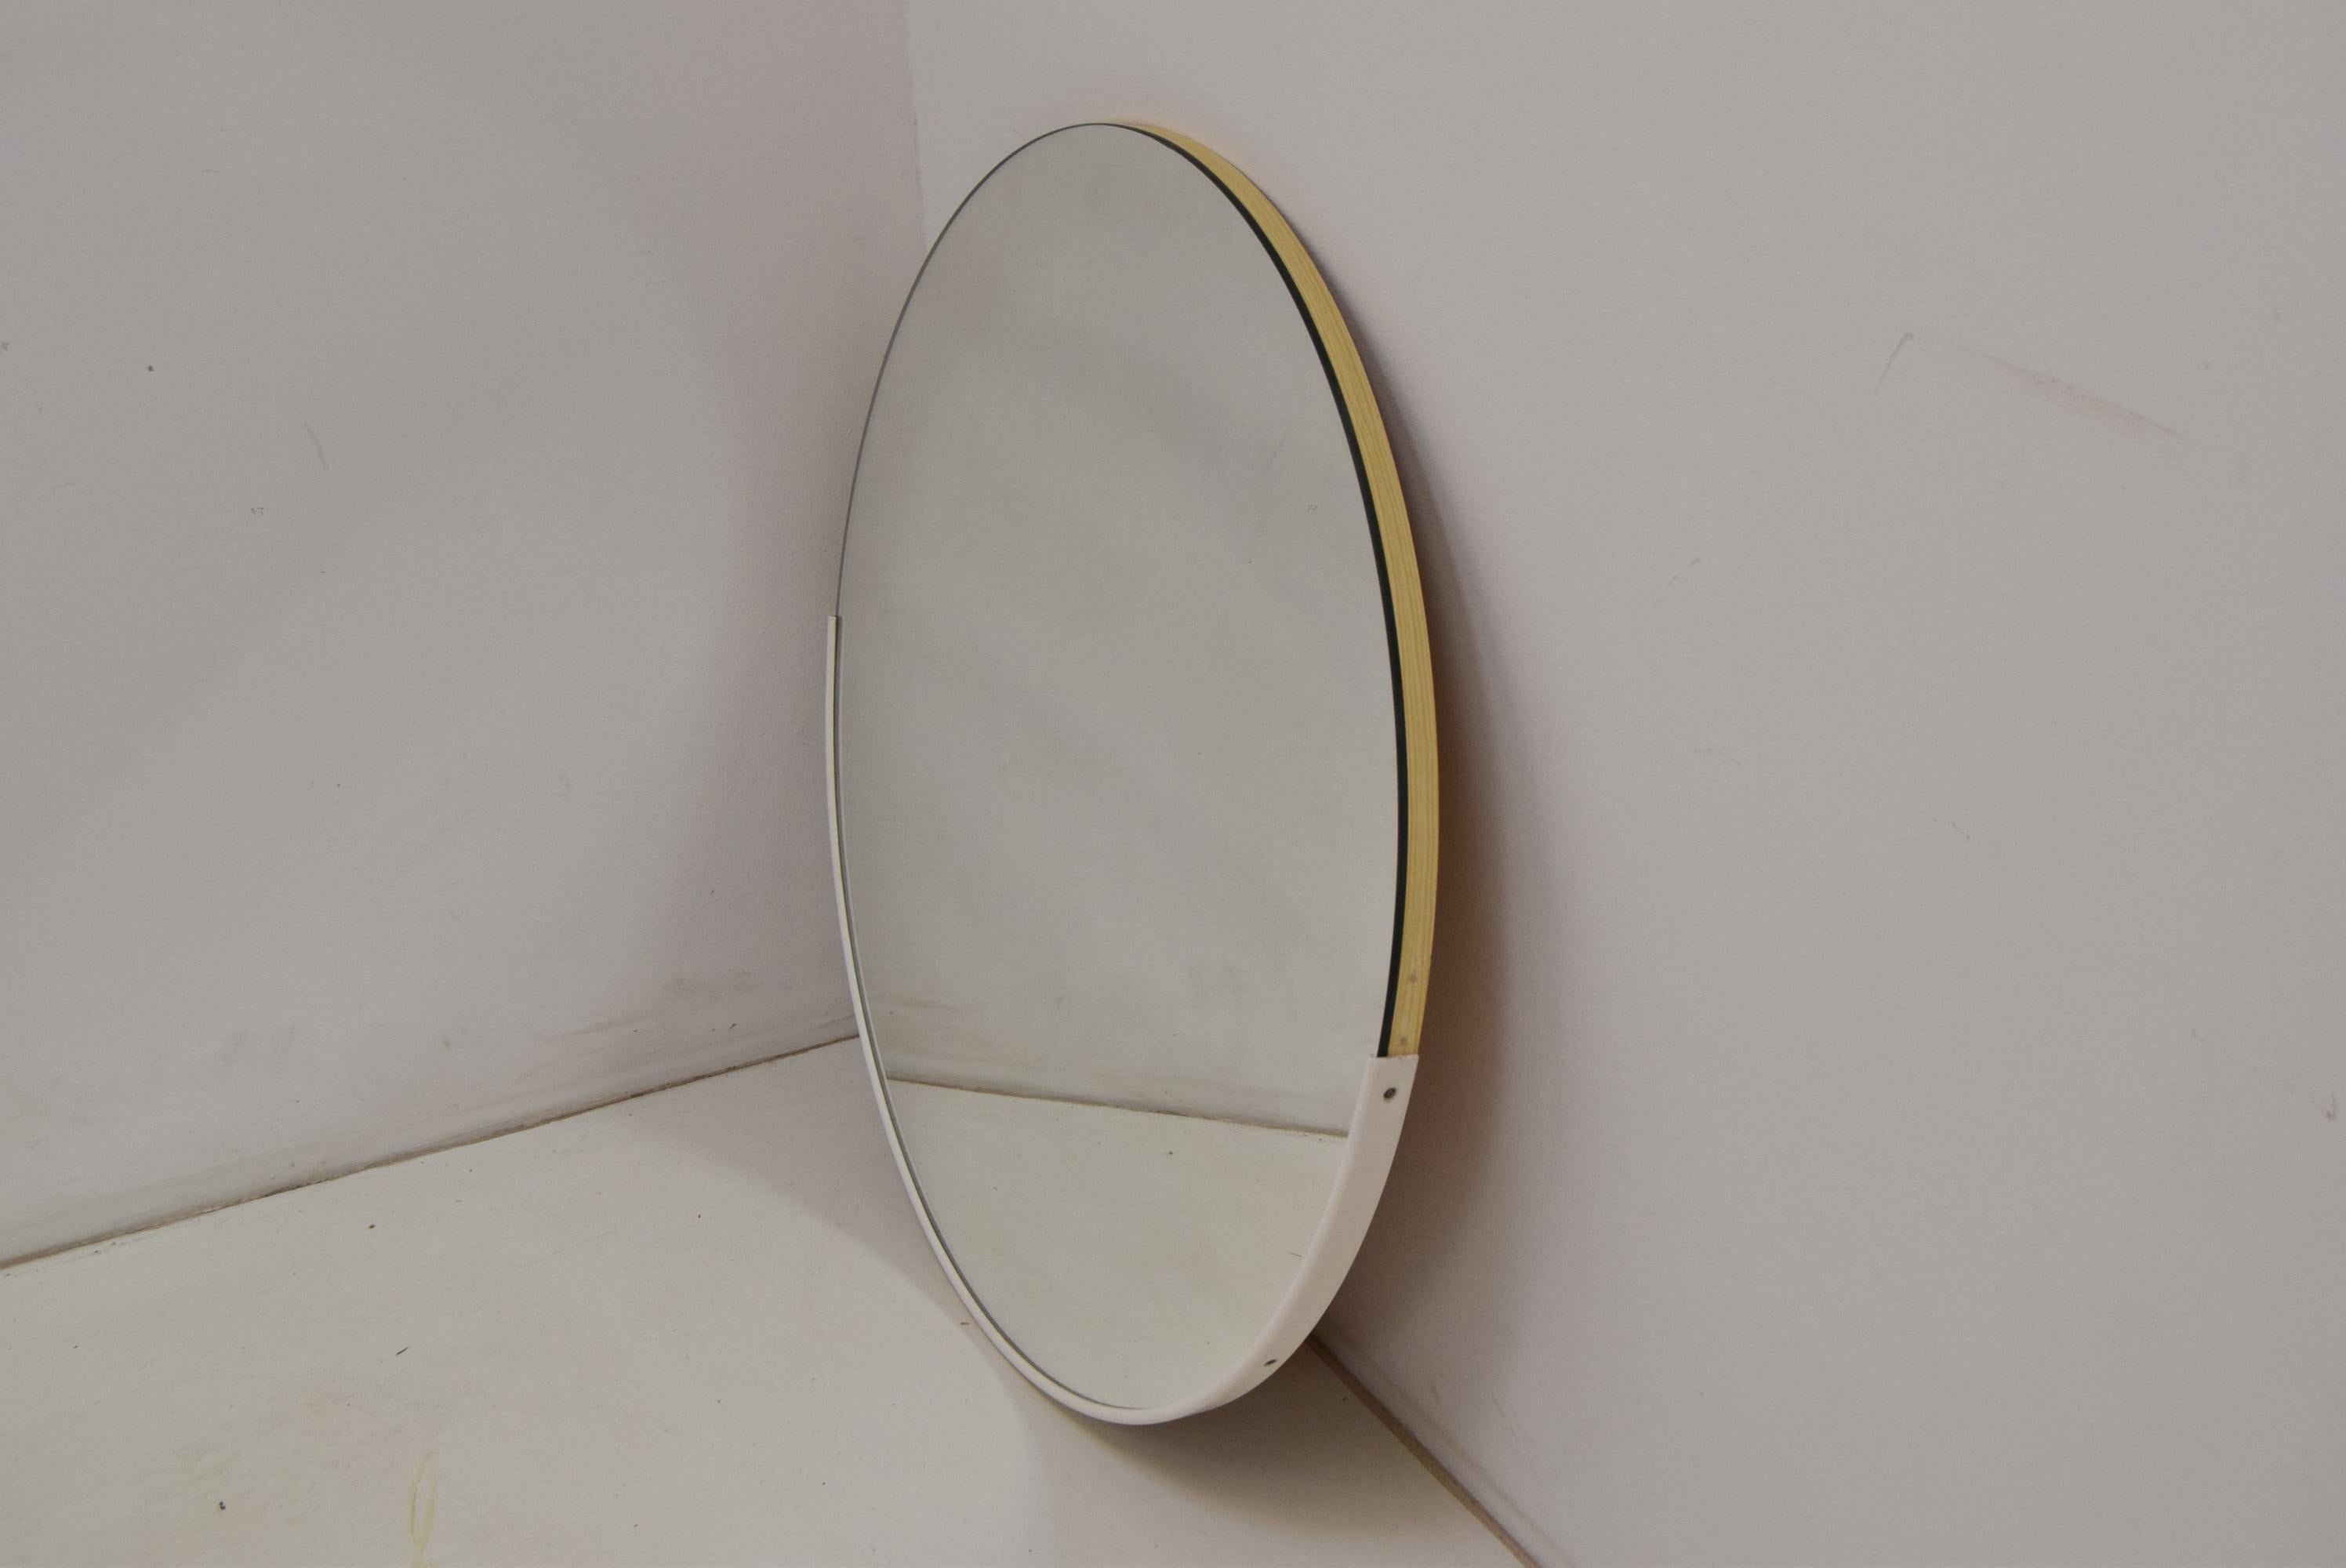 Made in Czechoslovakia
Made of Mirror, Plastic, Veneer
Re-polished
Good Original condition.